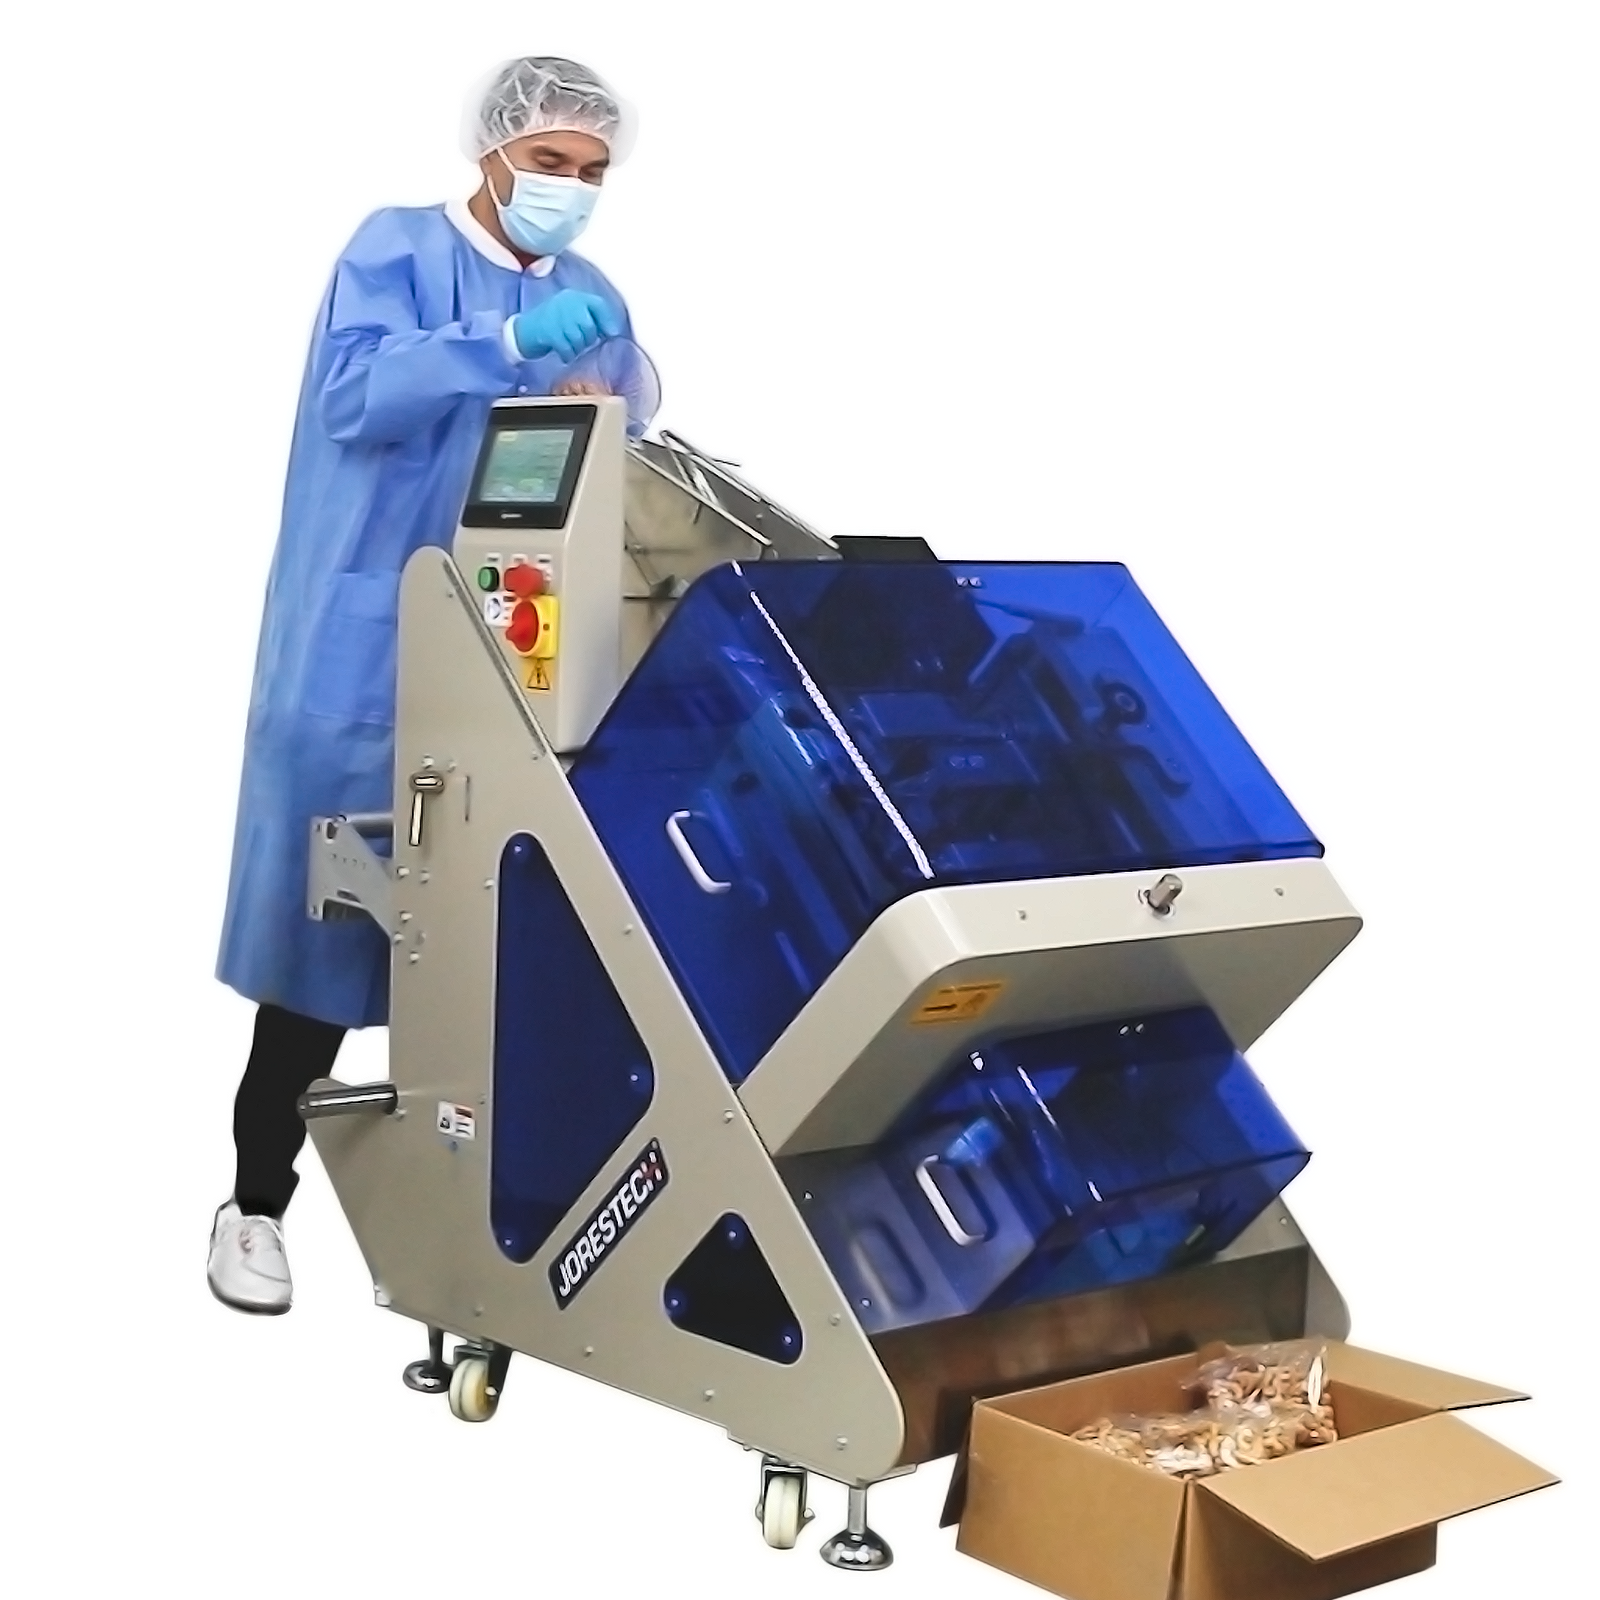 A person wearing protective disposable clothing while dispensing cashues into the Automatic-inclined-JORESTECH flow-wrapper. There is a brown card box on the floor with product packed in individual bags exiting the wrapper